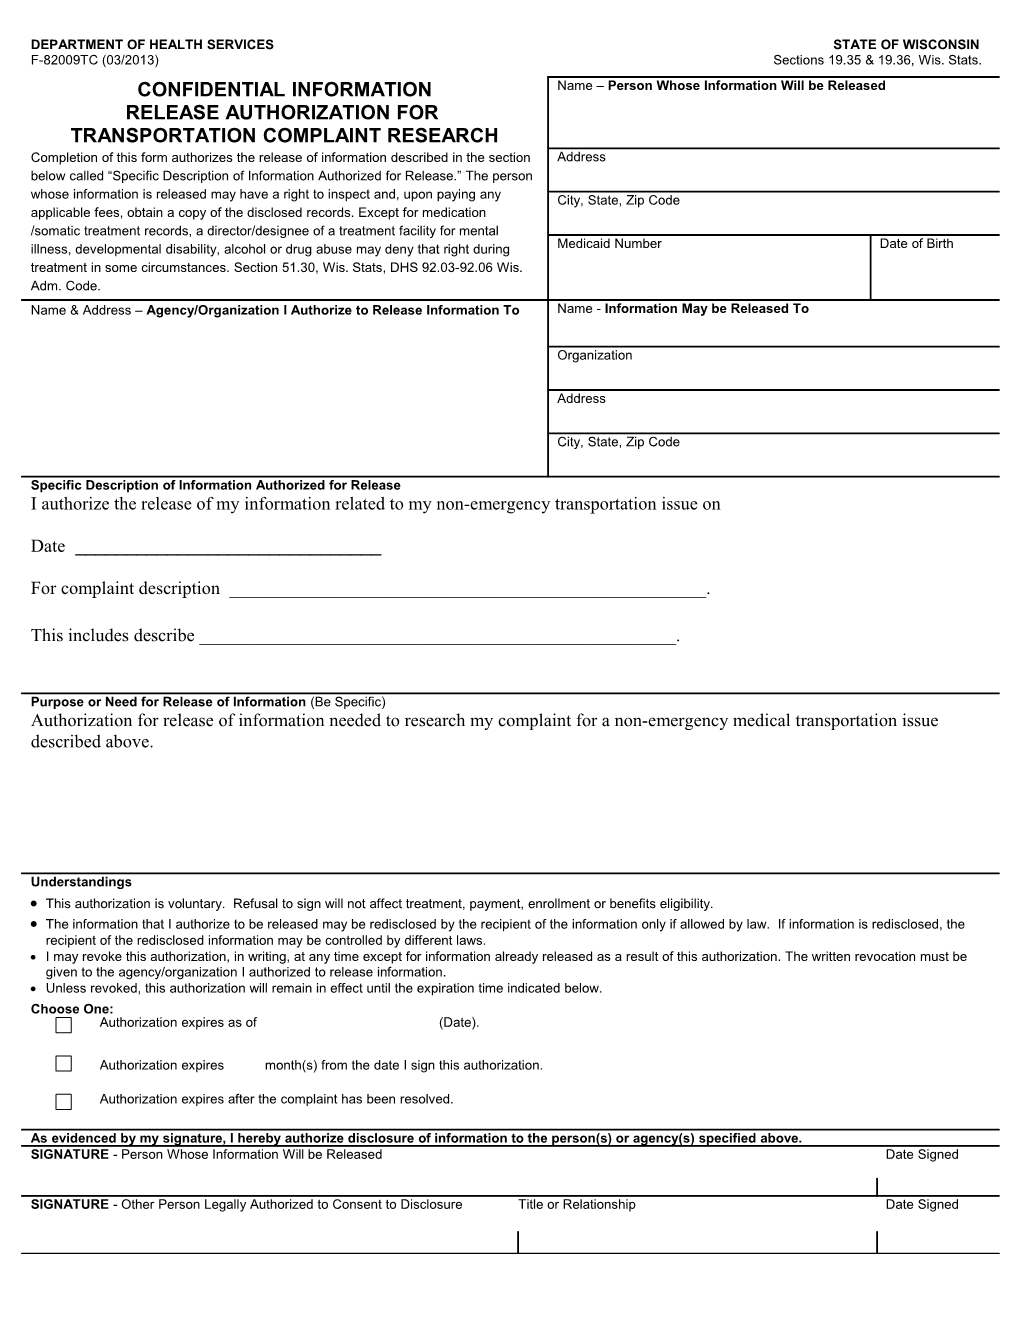 Confidential Information Release Authorization, F-82009